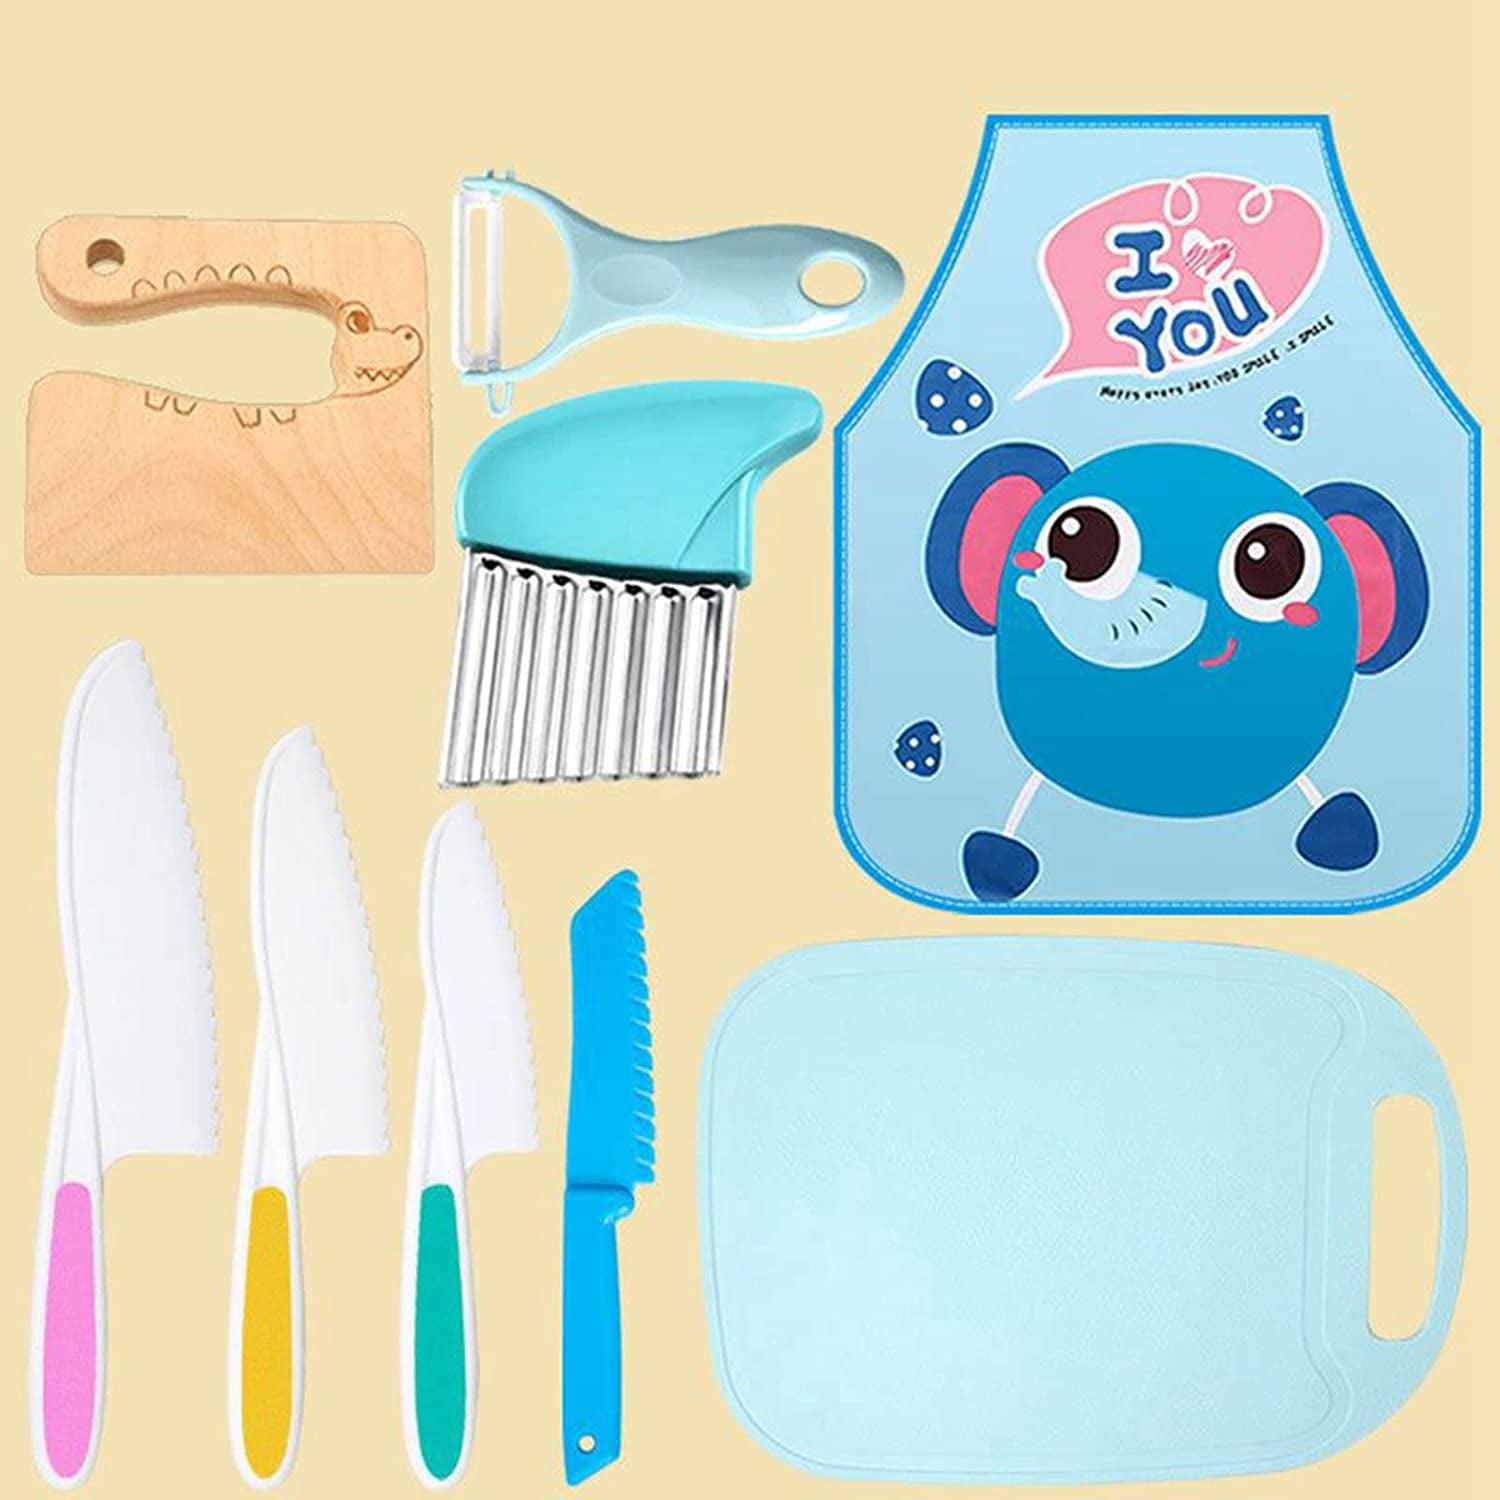  13 Pieces Montessori Kitchen Tools for Toddlers-Kids Cooking  Sets Real-Toddler Safe Knives Set for Real Cooking with Plastic Toddler  Safe Knives Crinkle Cutter Kids Cutting Board: Home & Kitchen